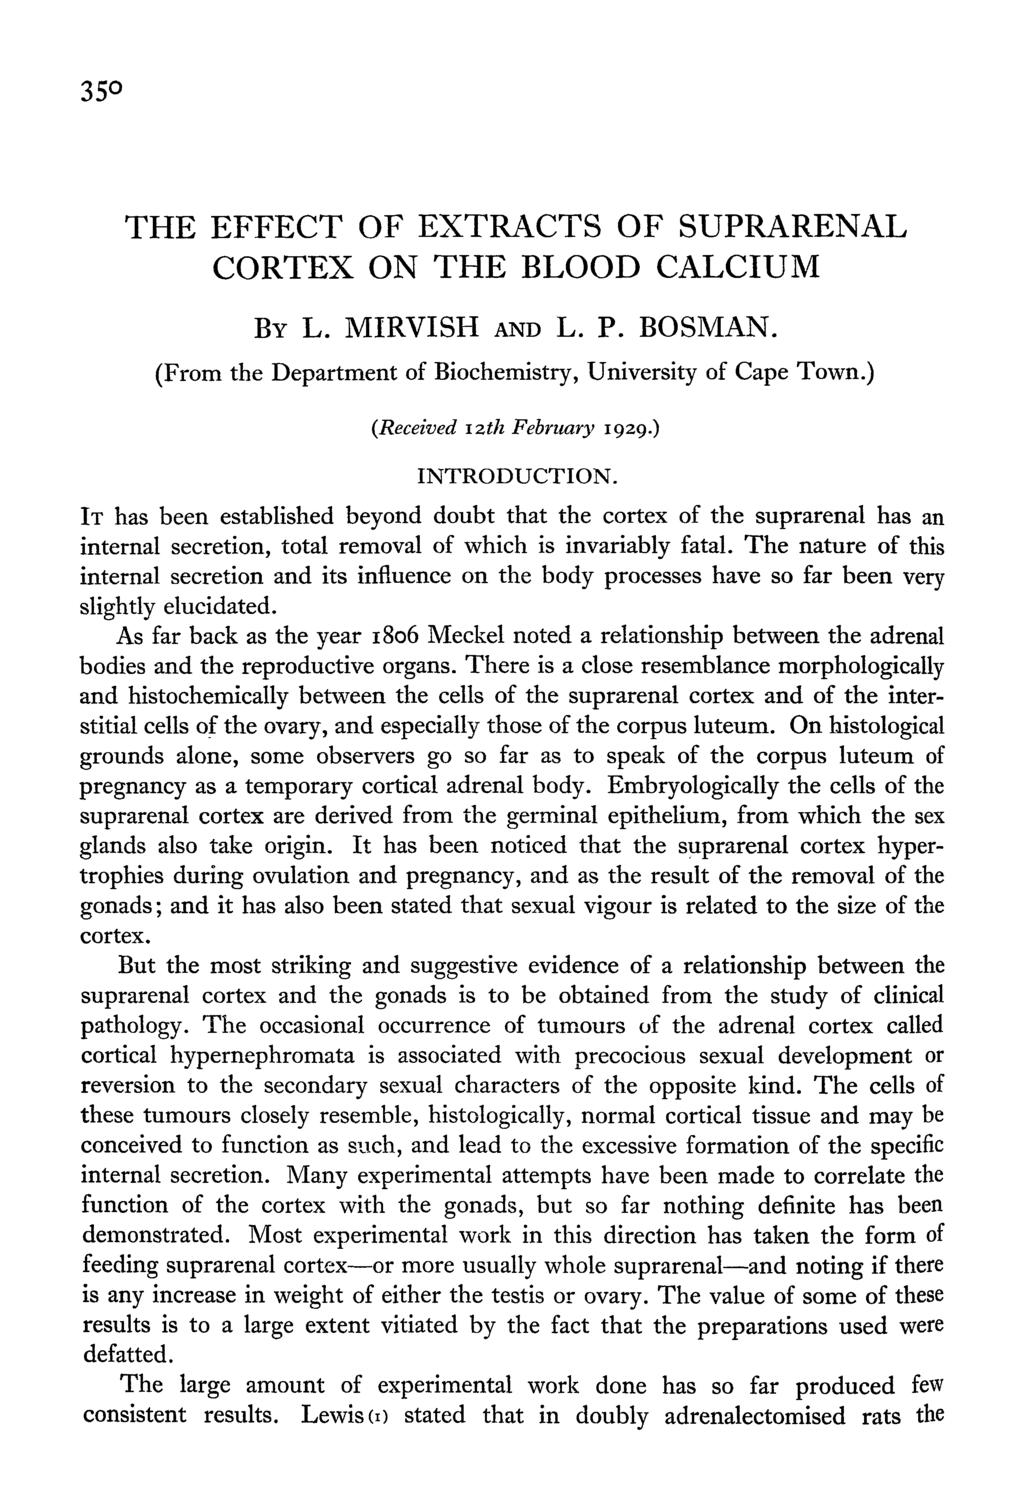 35 THE EFFECT OF EXTRACTS OF SUPRARENAL CORTEX ON THE BLOOD CALCIUM BY L. MIRVISH AND L. P. BOSMAN. (From the Department of Biochemistry, University of Cape Town.) (Received 12th February 1929.